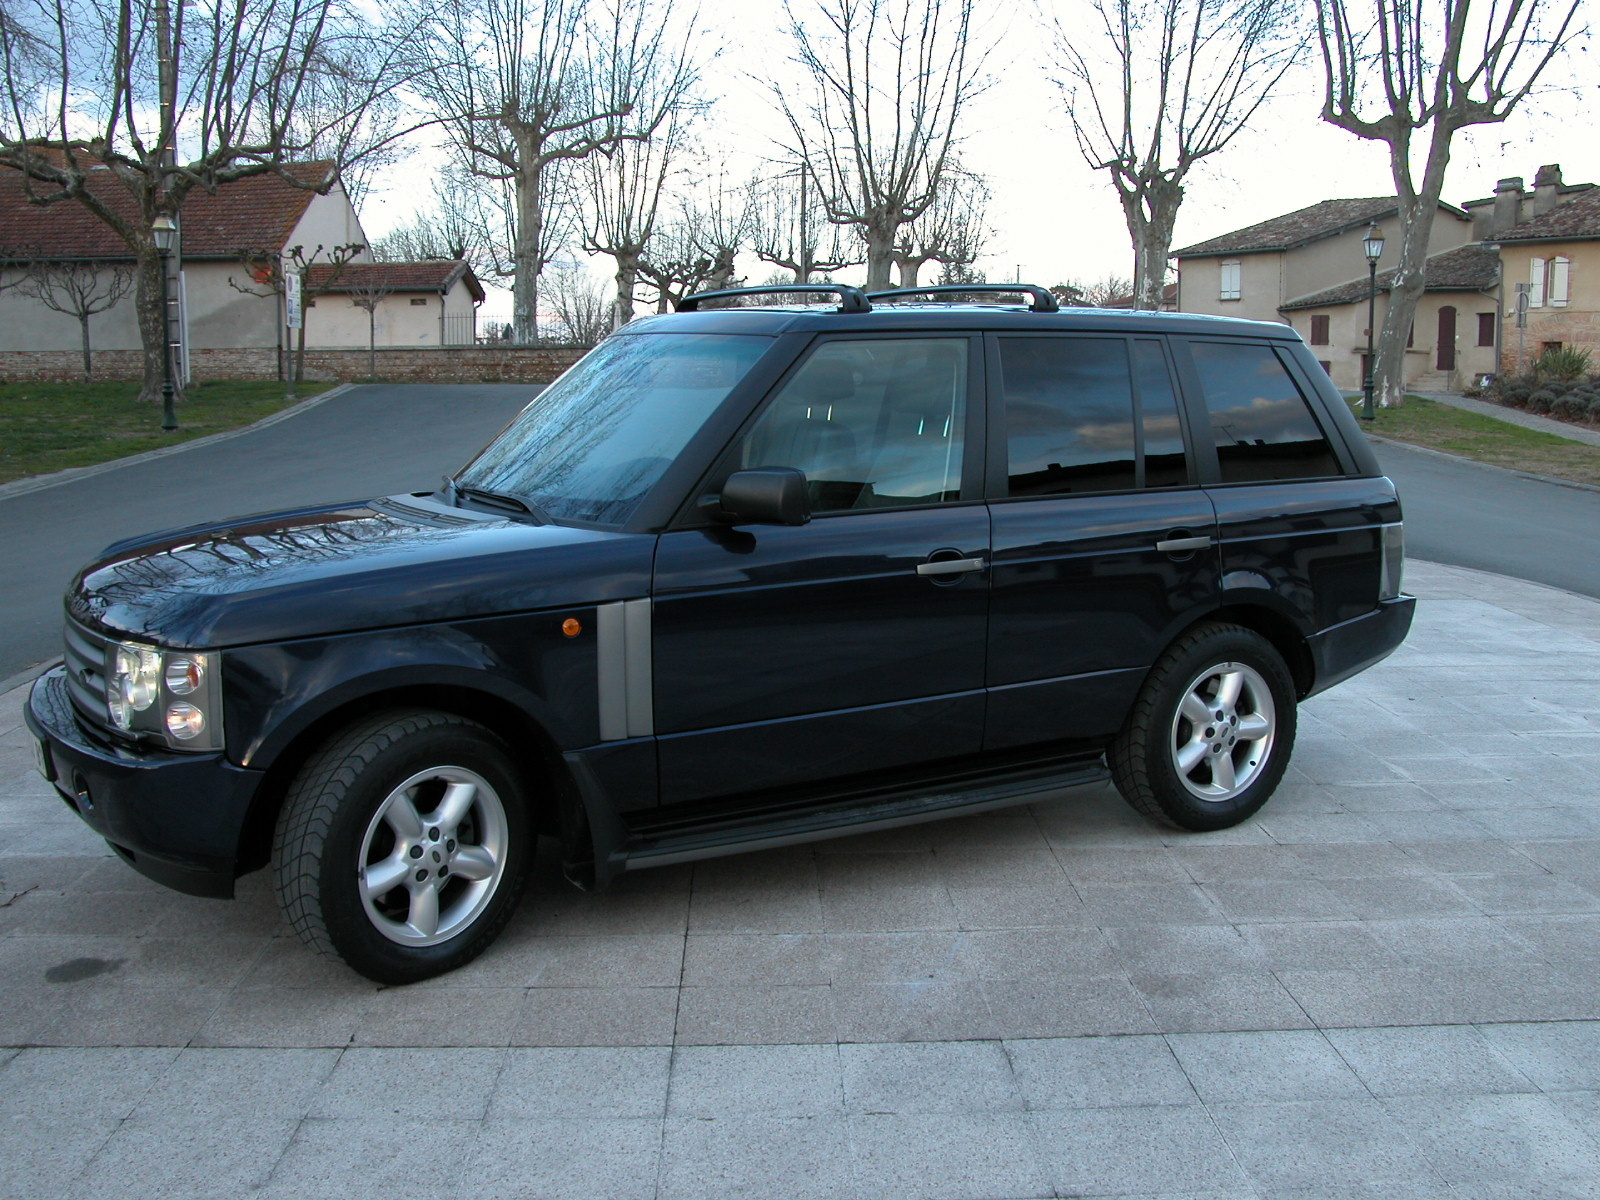 2003 Land Rover Range Rover: Prices, Reviews & Pictures - CarGurus